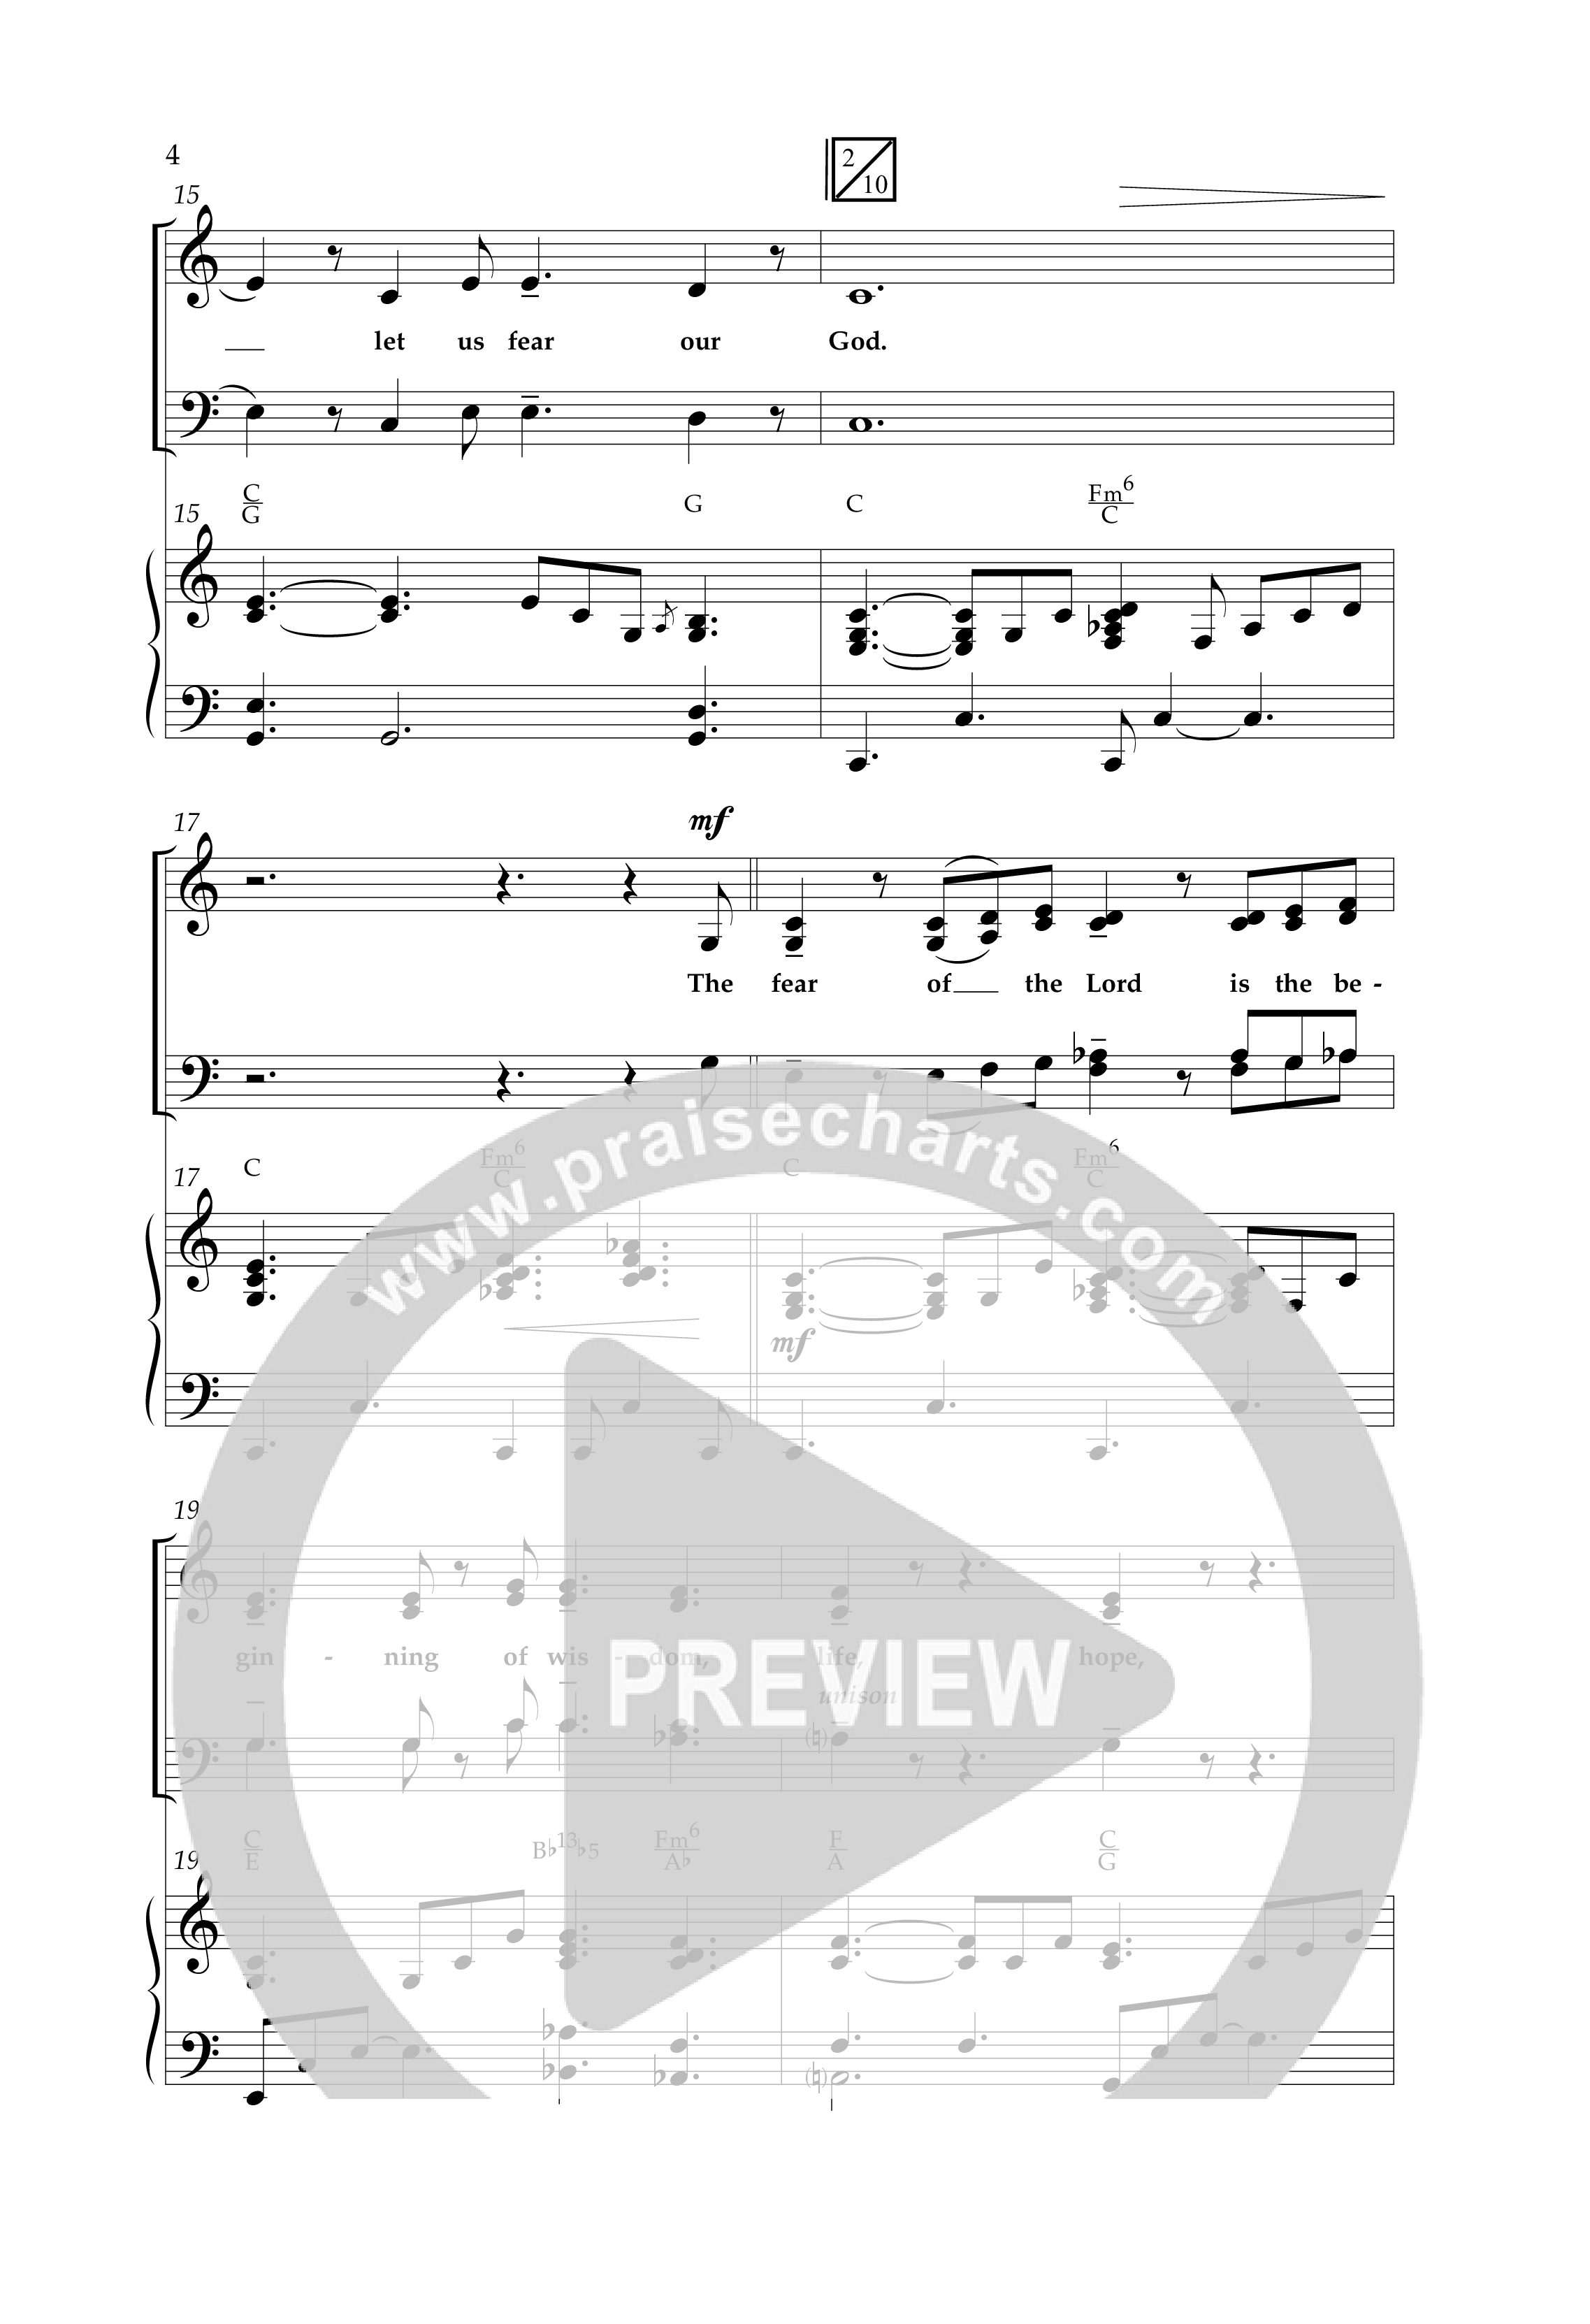 The Fear Of The Lord (Choral Anthem SATB) Anthem (SATB/Piano) (Lifeway Choral / Arr. Cliff Duren)